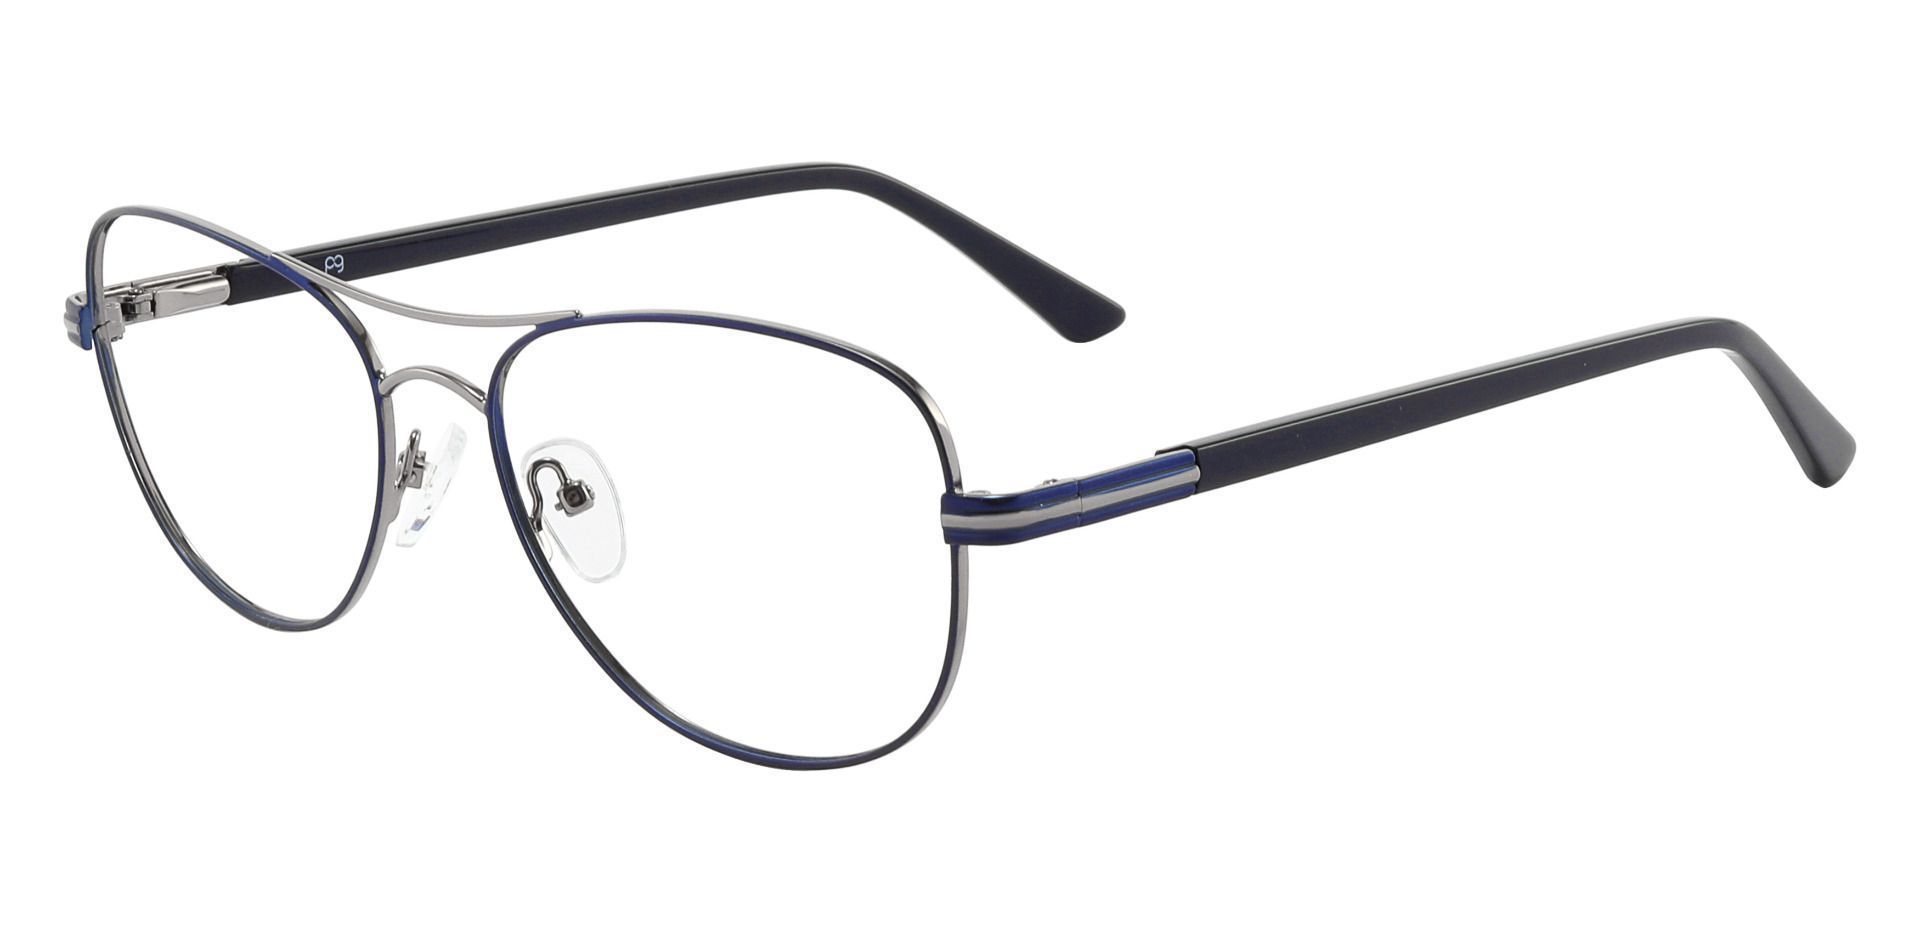 Reeves Aviator Lined Bifocal Glasses - Blue